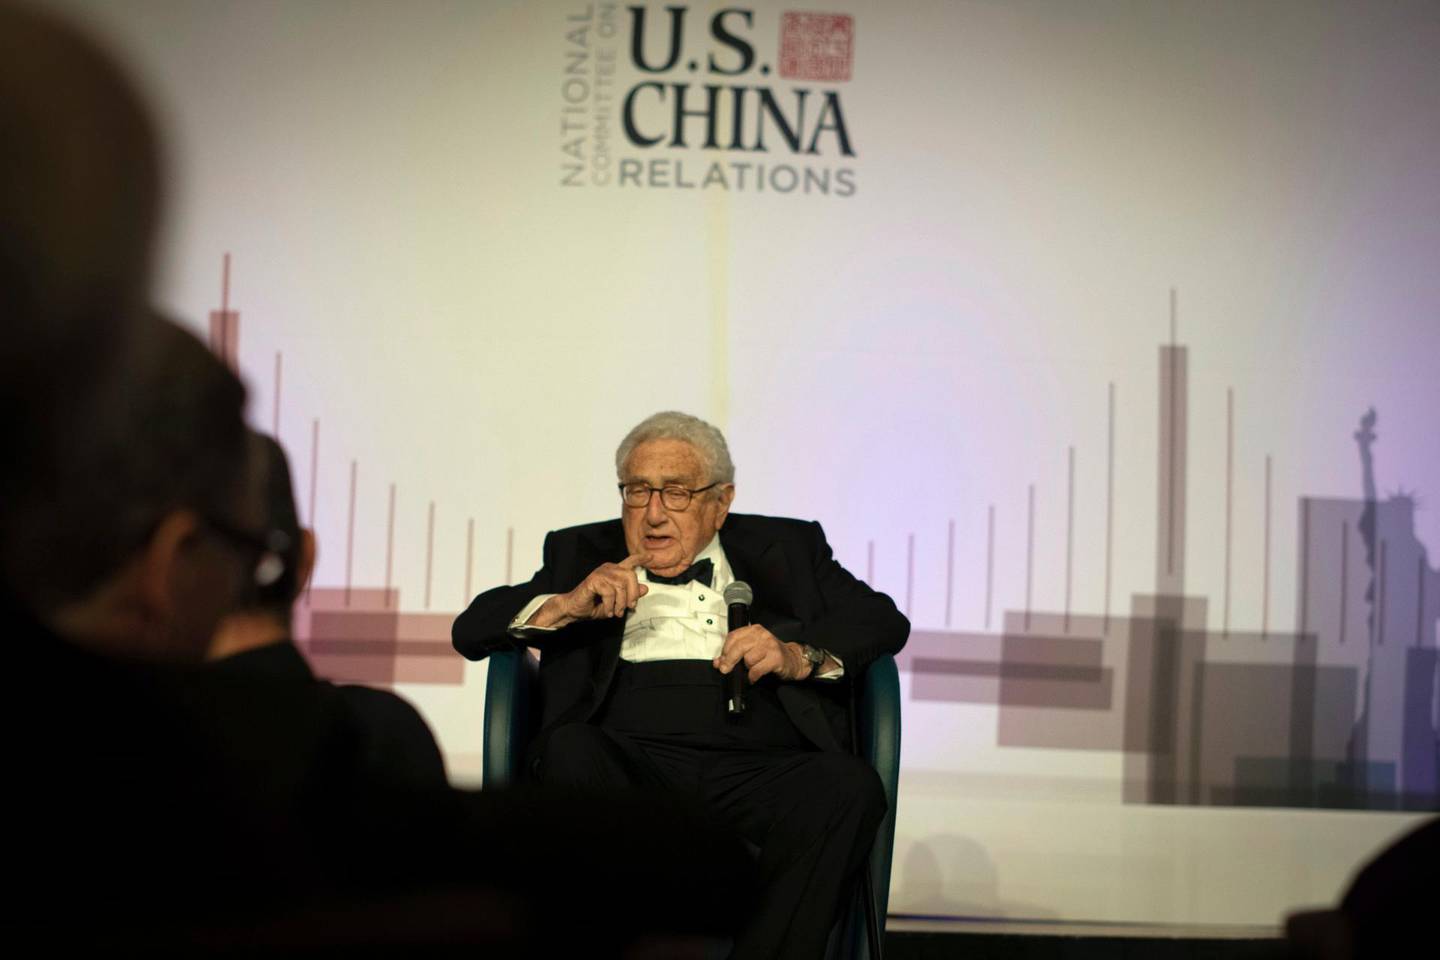 Former U.S. Secretary of State Henry Kissinger gives a speech at an annual dinner for the National Committee on U.S. China Relations, Thursday, Nov. 14, 2019, in New York. (AP Photo/Robert Bumsted)